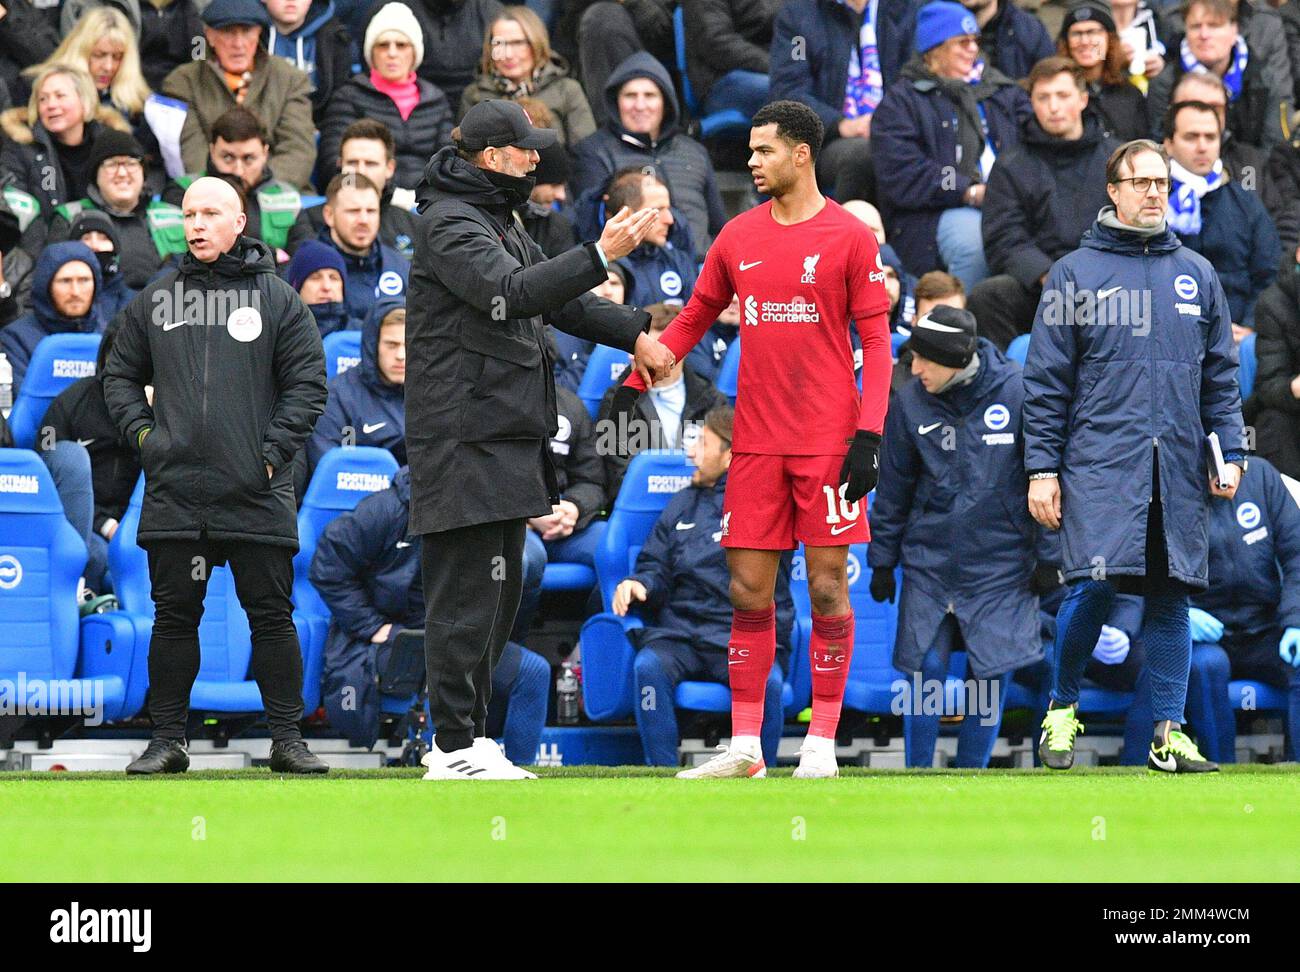 Brighton, UK. 29th Jan, 2023. Jurgen Klopp Manager of Liverpool FC gives instructions to Cody Gakpo of Liverpool FC during the FA Cup Fourth Round match between Brighton & Hove Albion and Liverpool at The Amex on January 29th 2023 in Brighton, England. (Photo by Jeff Mood/phcimages.com) Credit: PHC Images/Alamy Live News Stock Photo